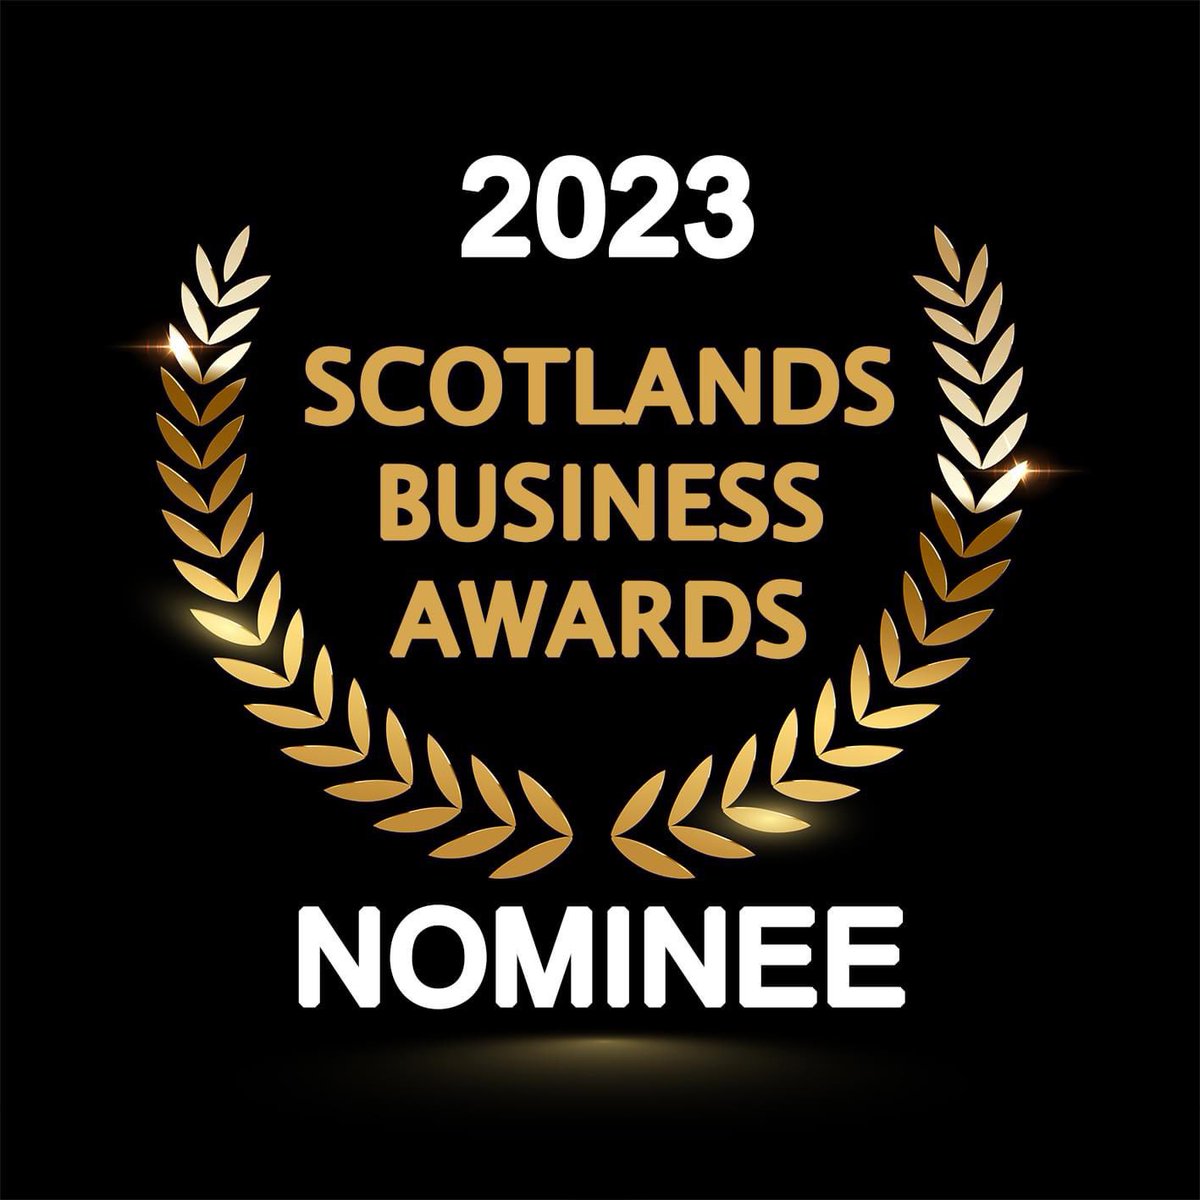 Scotlands Business Awards! Delighted to be nominated for “Best Health & Fitness Business” 2023! This nomination means the world but we need your votes!!!👇🏽 nominees.info/vote Business name= Academy of Sport & Wellbeing. Thank you😃